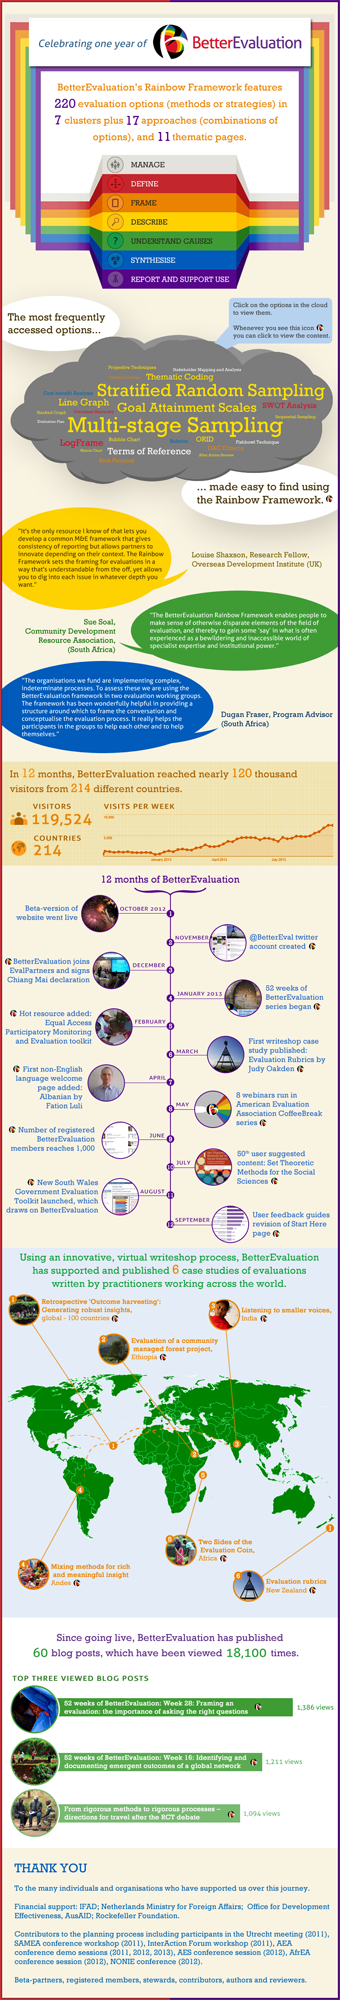 BetterEvaluation - 1 year infographic